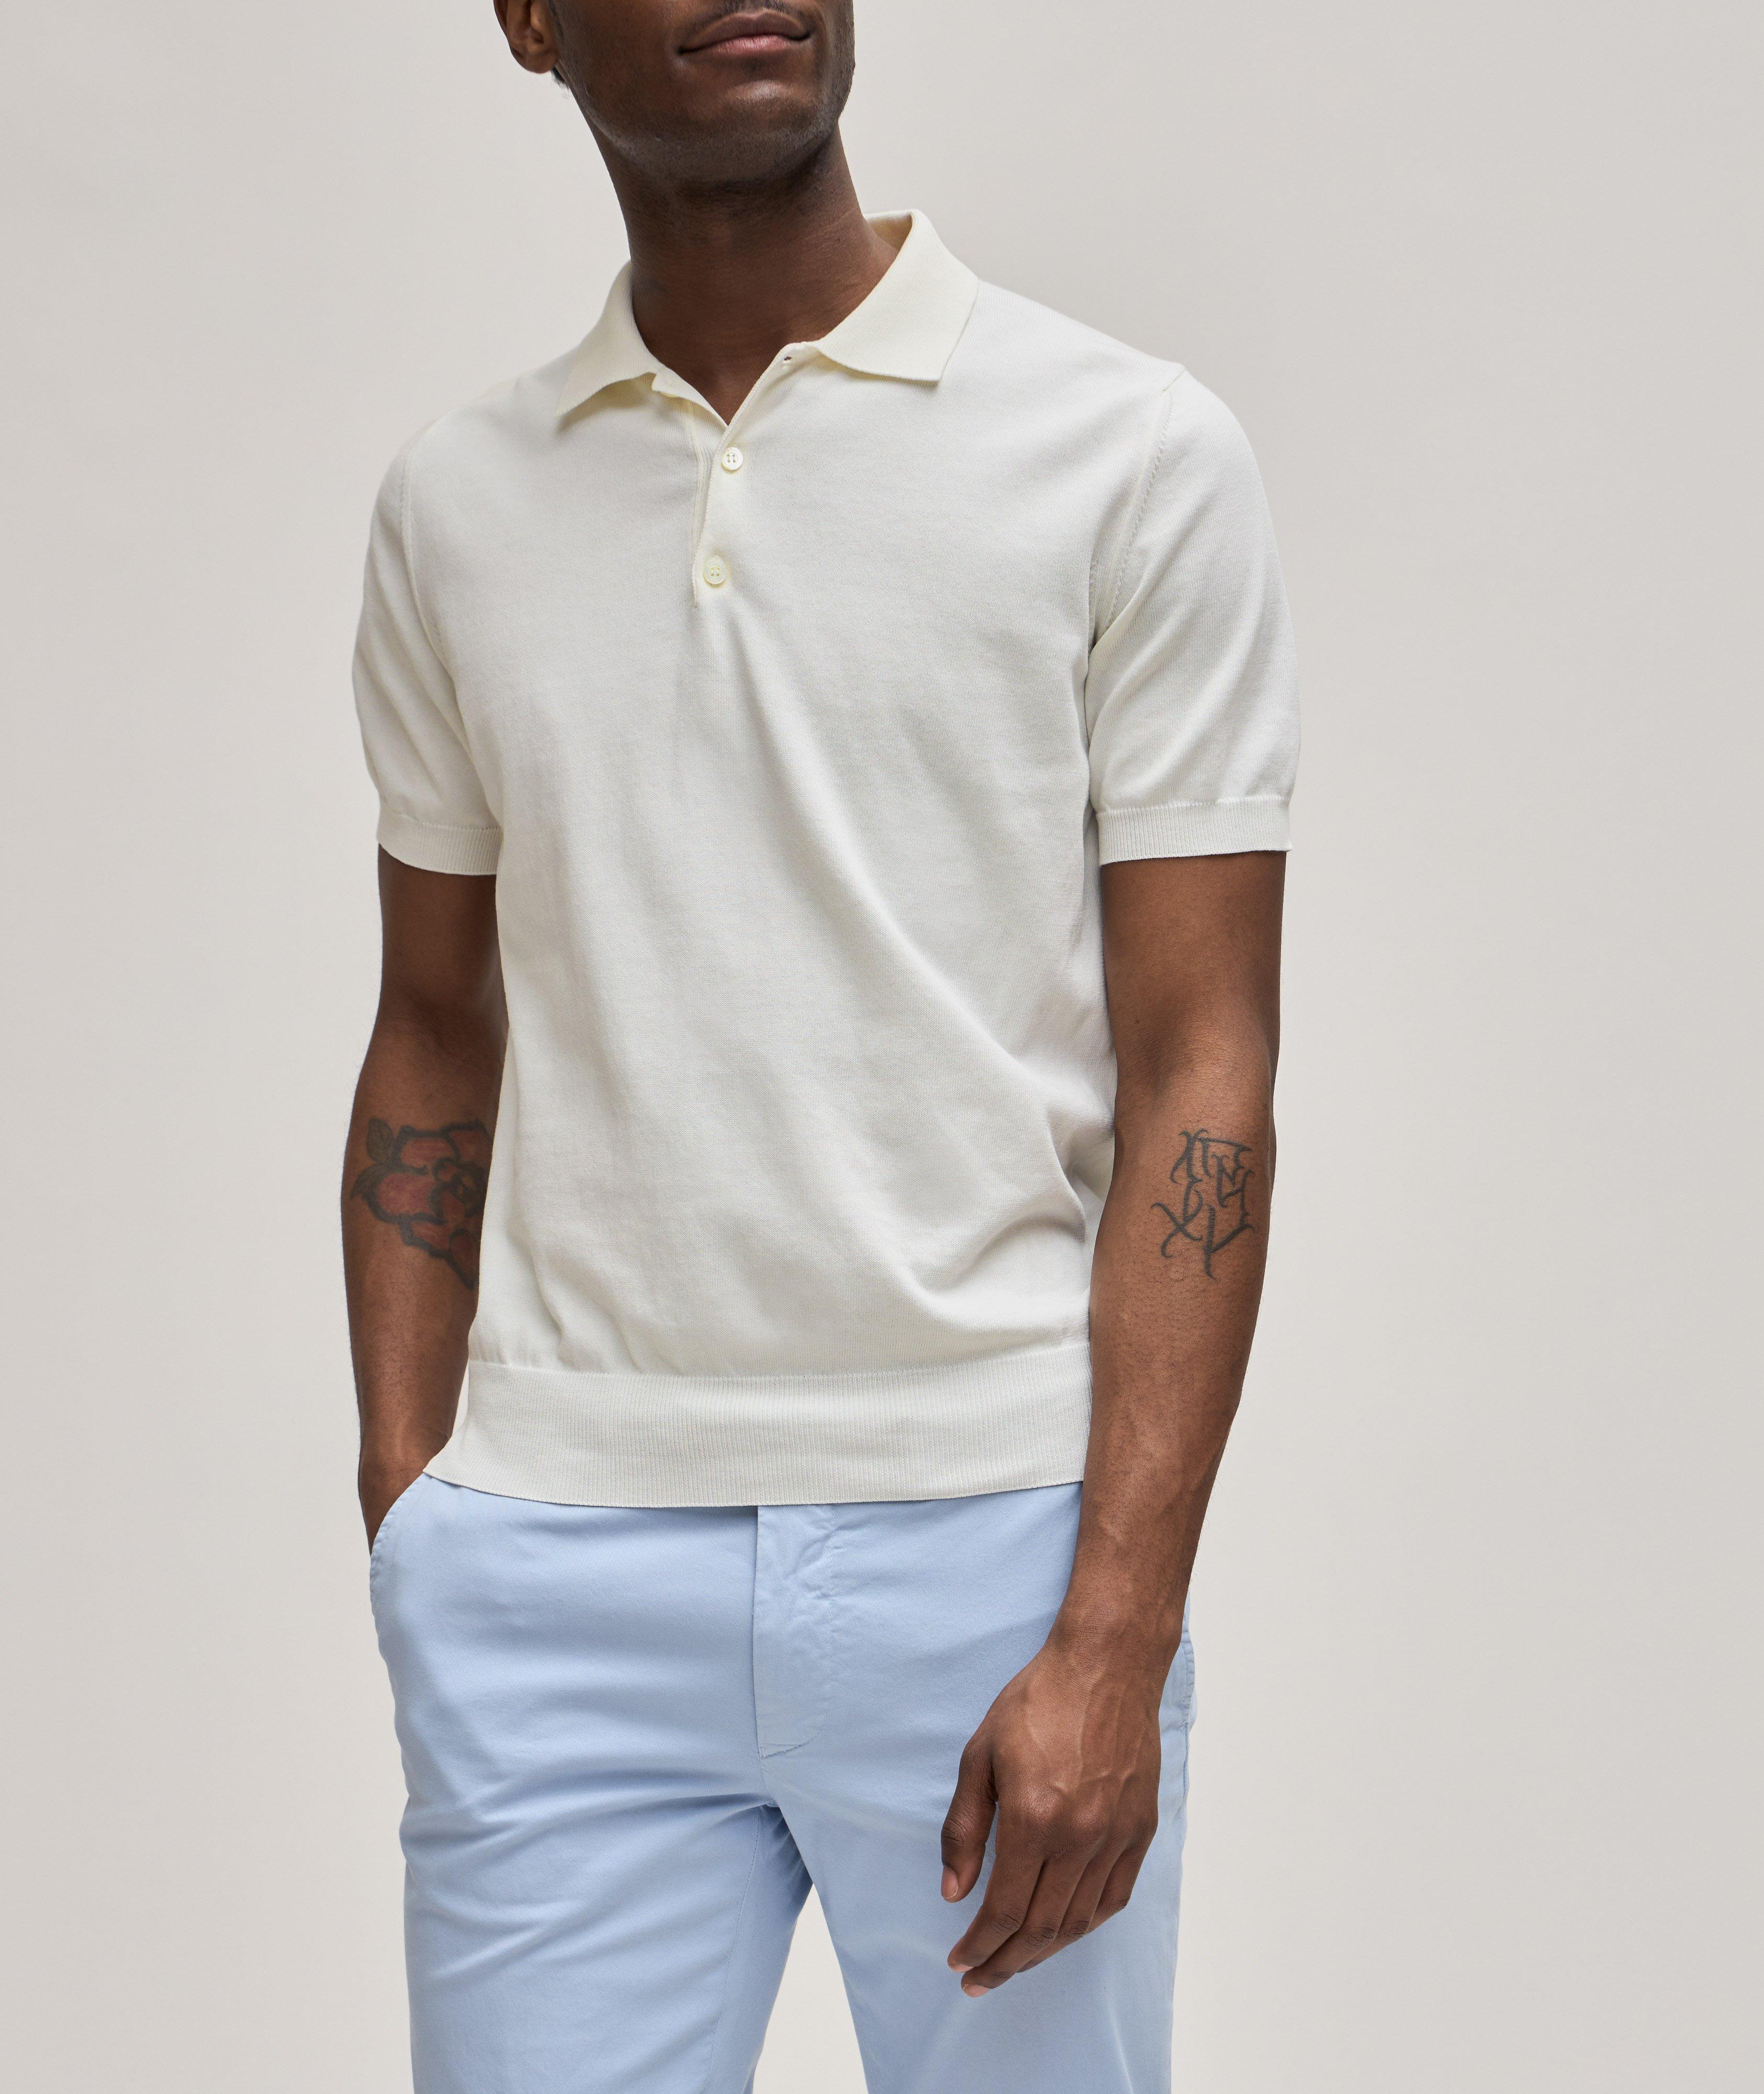 Solid Cotton Knit Polo